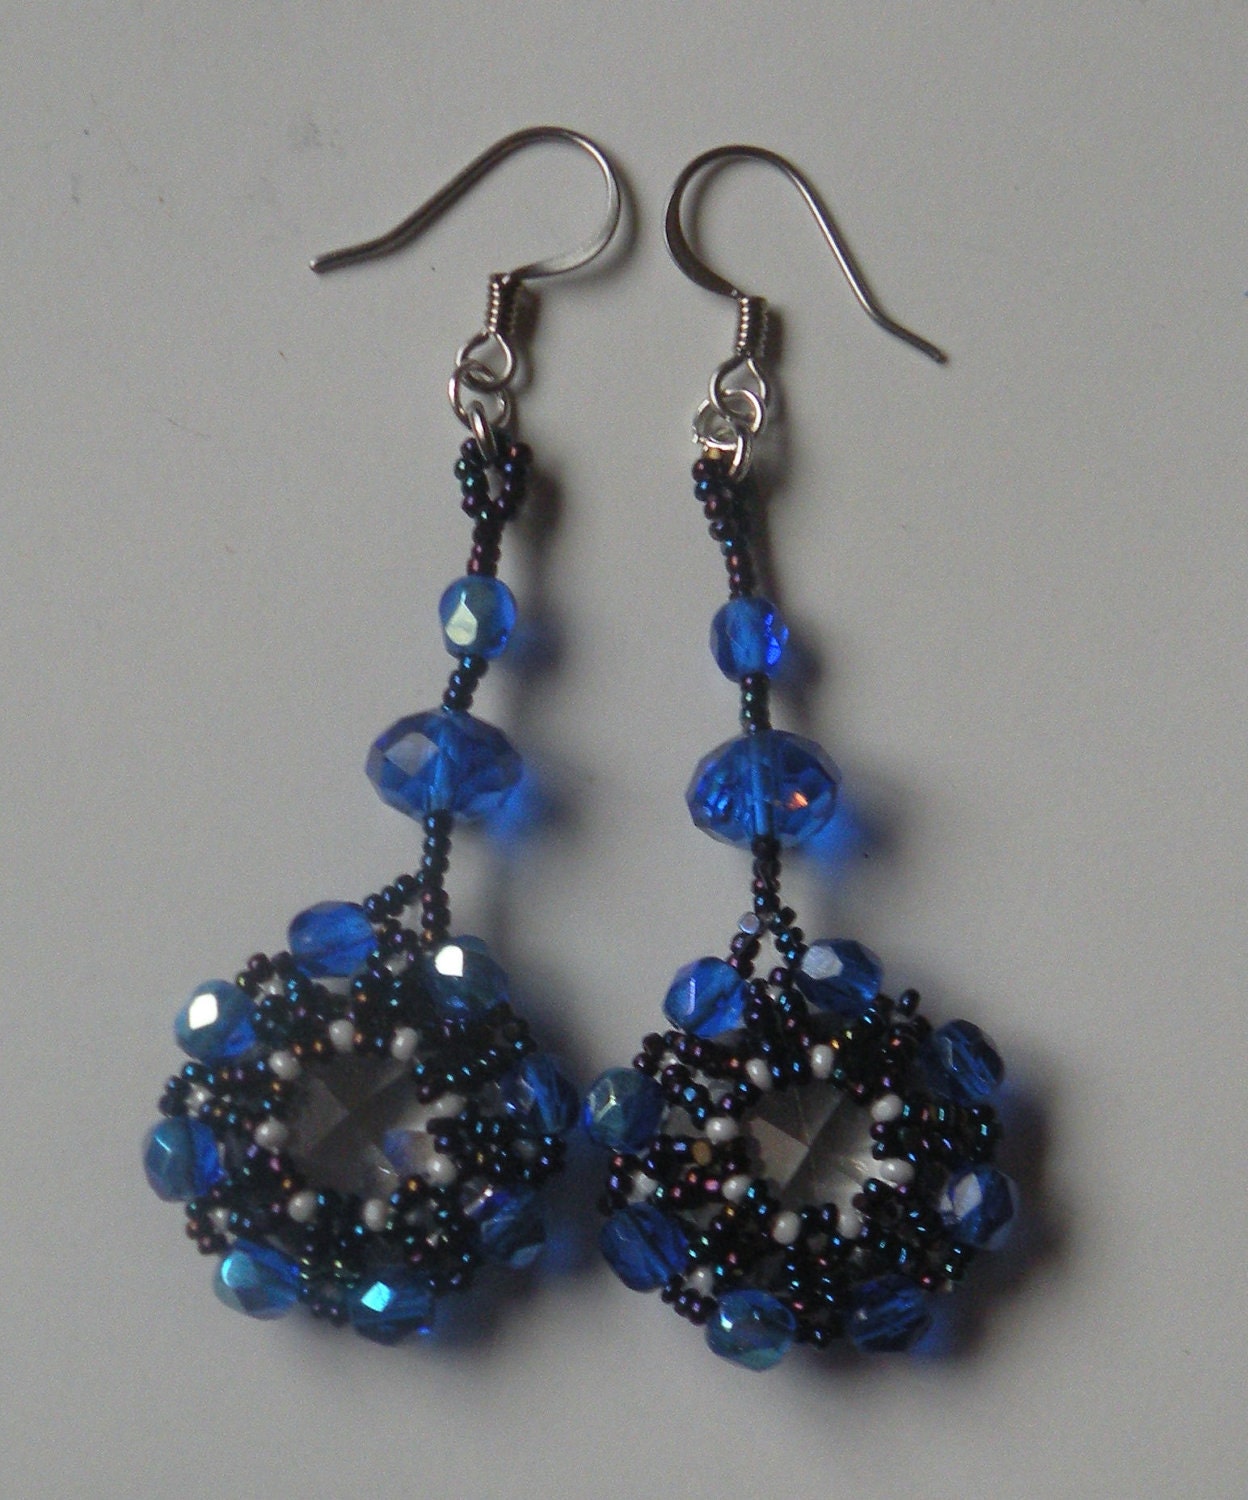 Blue Octagon Crystal Earrings with Rondelle Embellishment